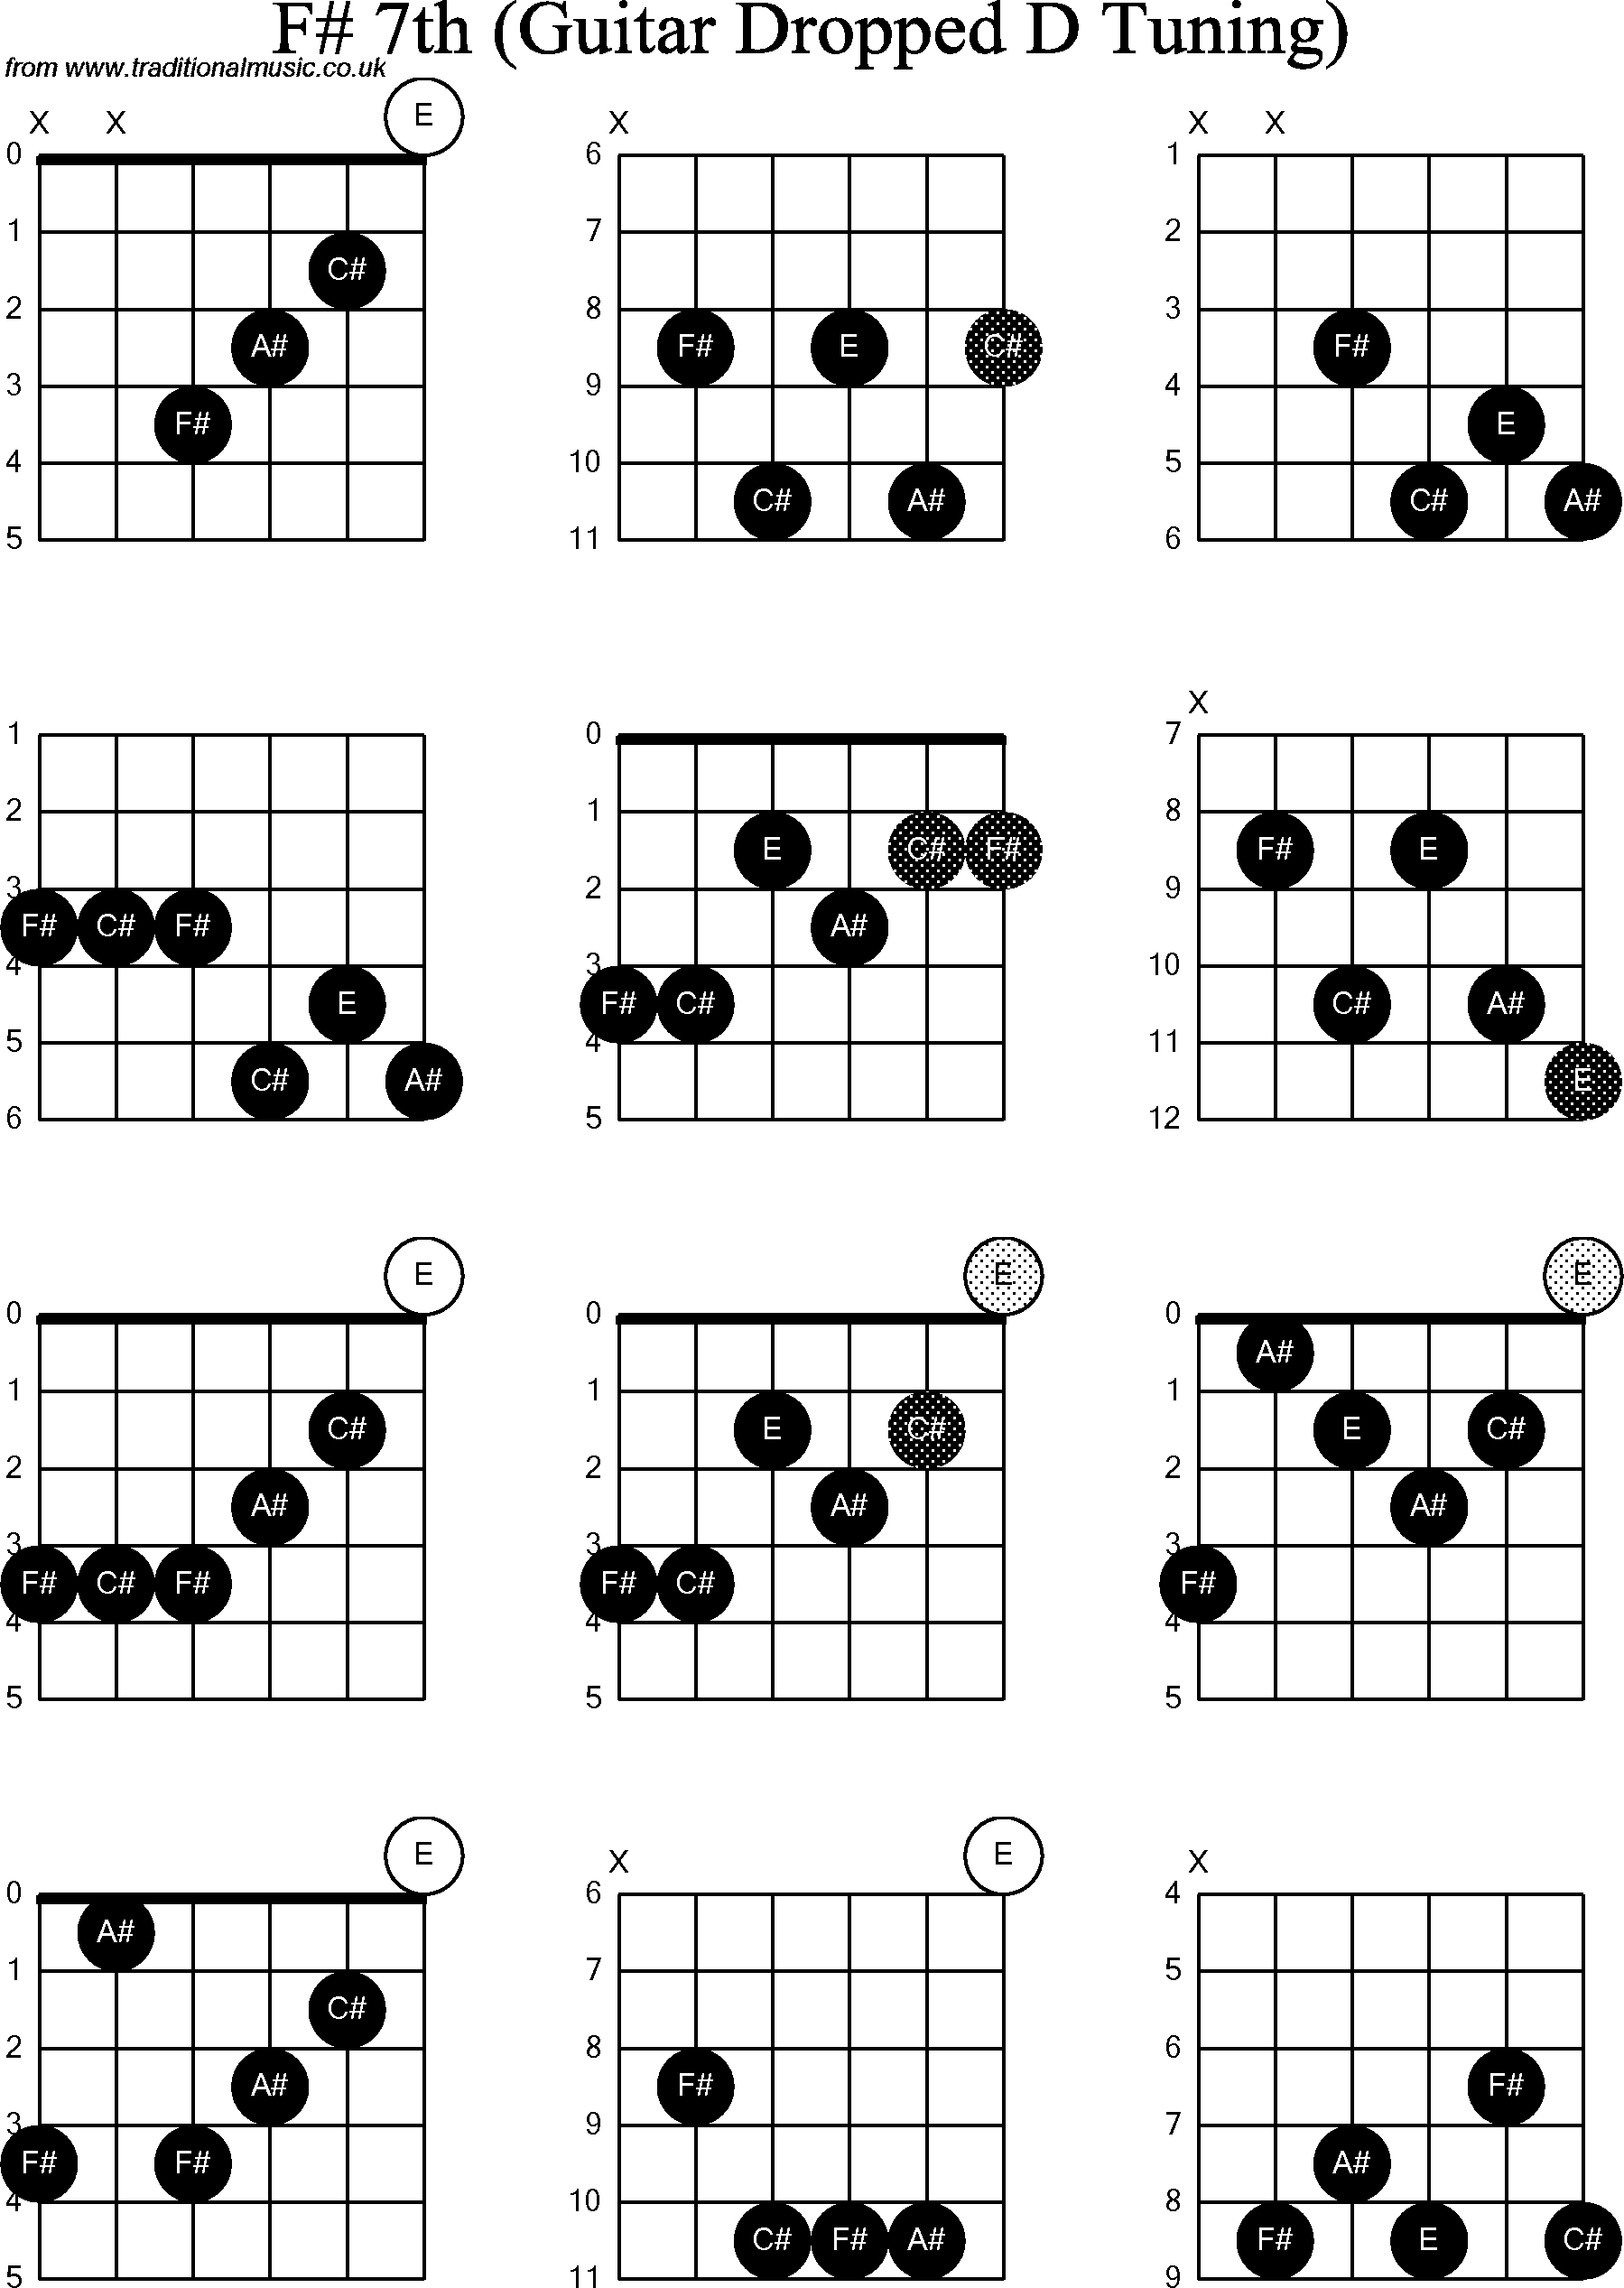 Chord diagrams for dropped D Guitar(DADGBE), F Sharp7th